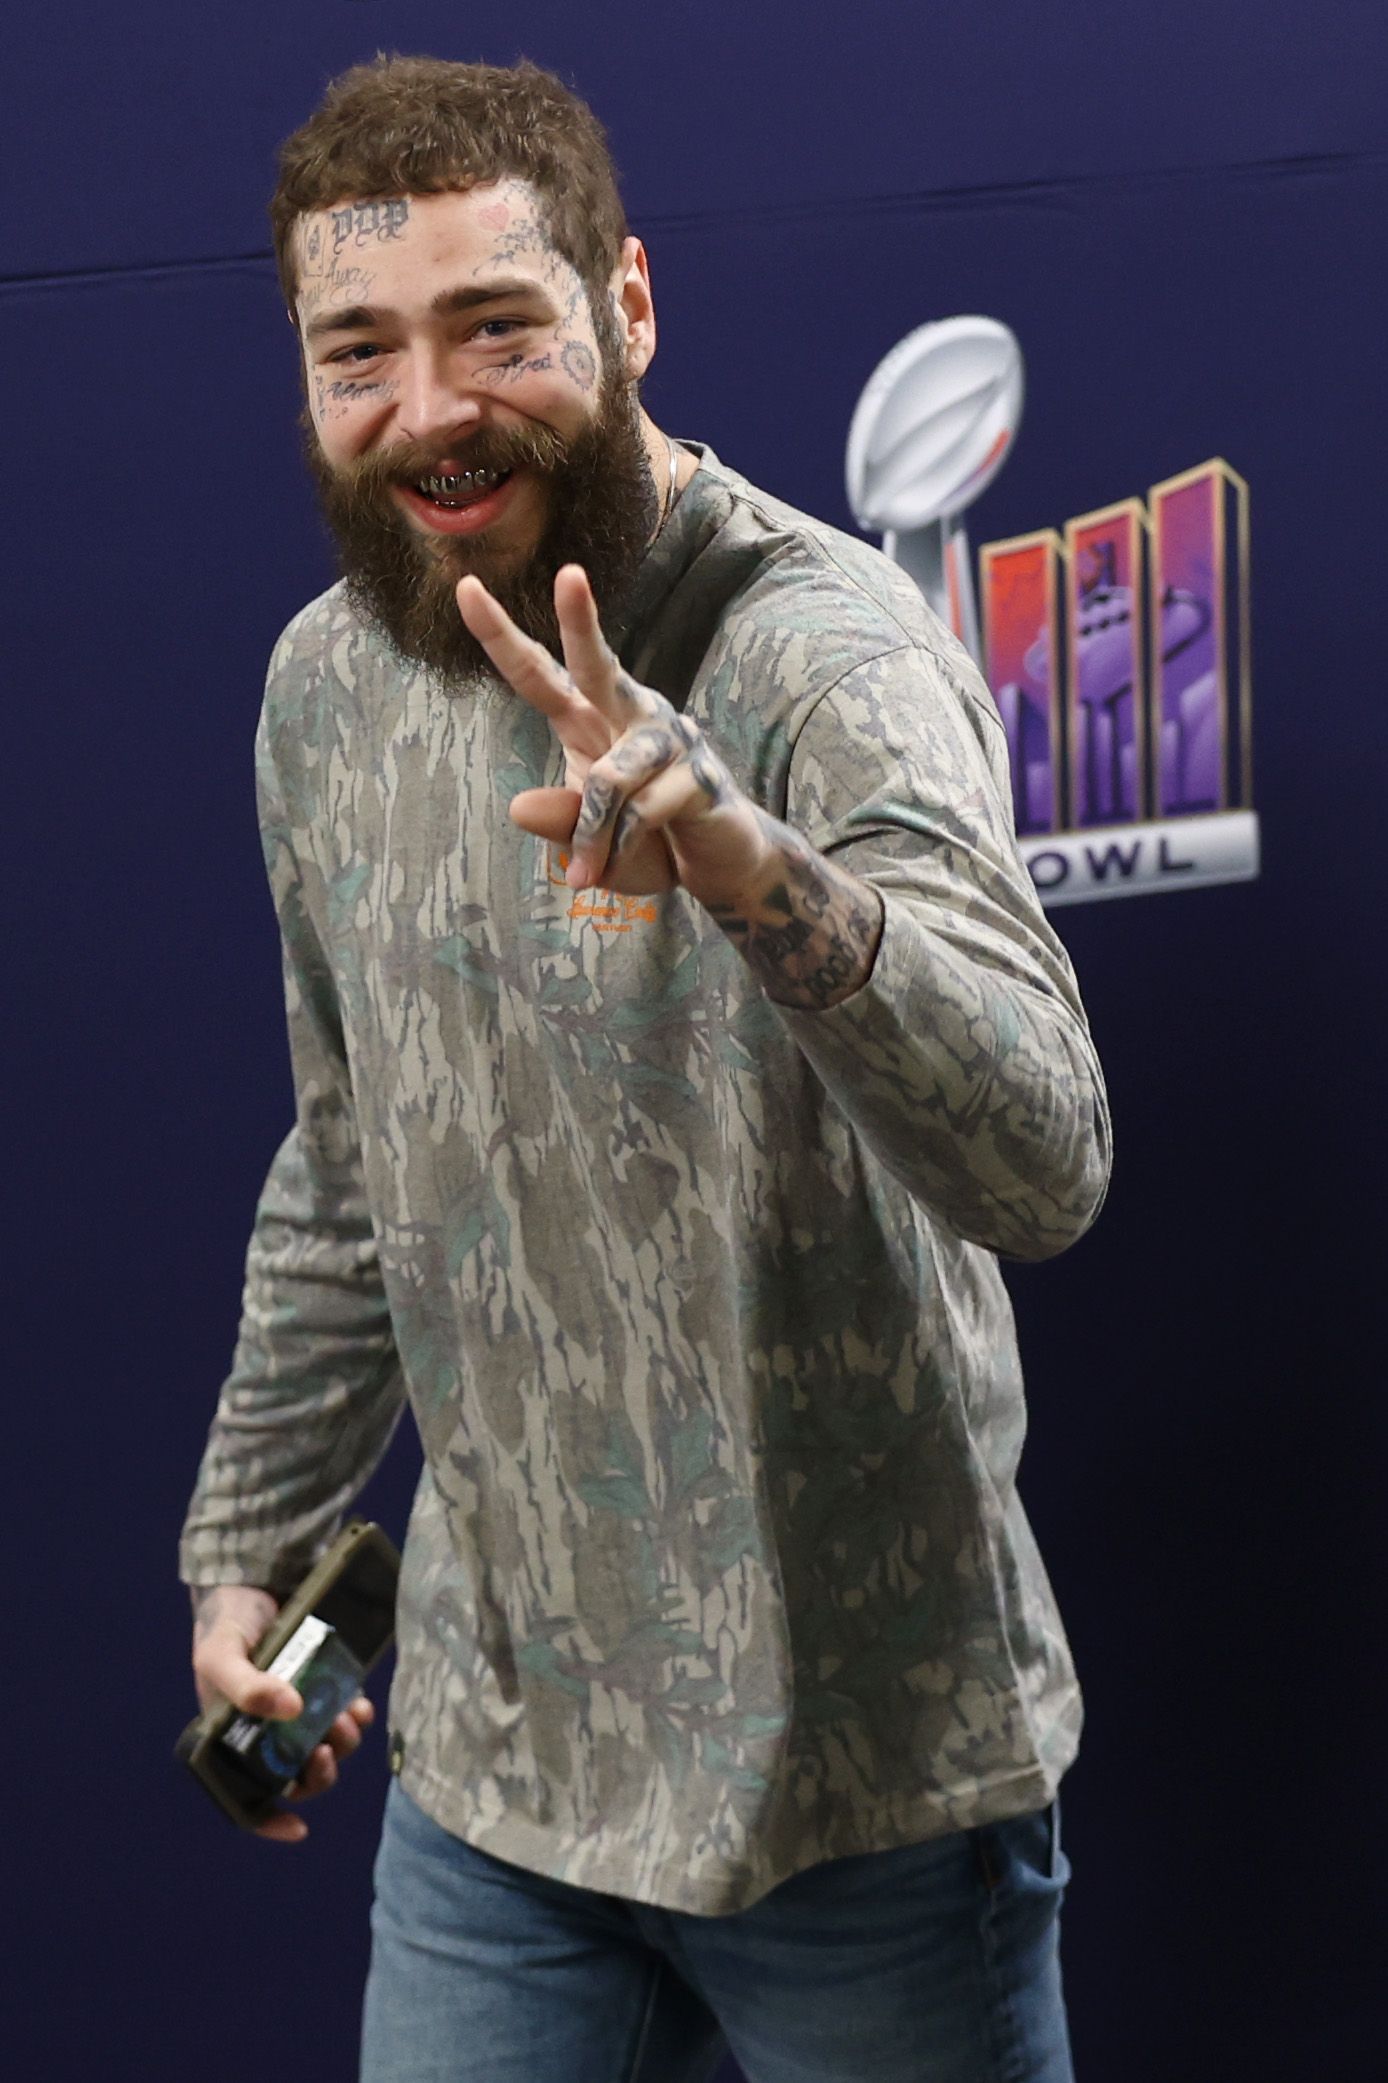 LAS VEGAS, NEVADA - FEBRUARY 11: American rapper and singer Post Malone arrives before Super Bowl LVIII at Allegiant Stadium on February 11, 2024 in Las Vegas, Nevada. (Photo by Tim Nwachukwu/Getty Images)